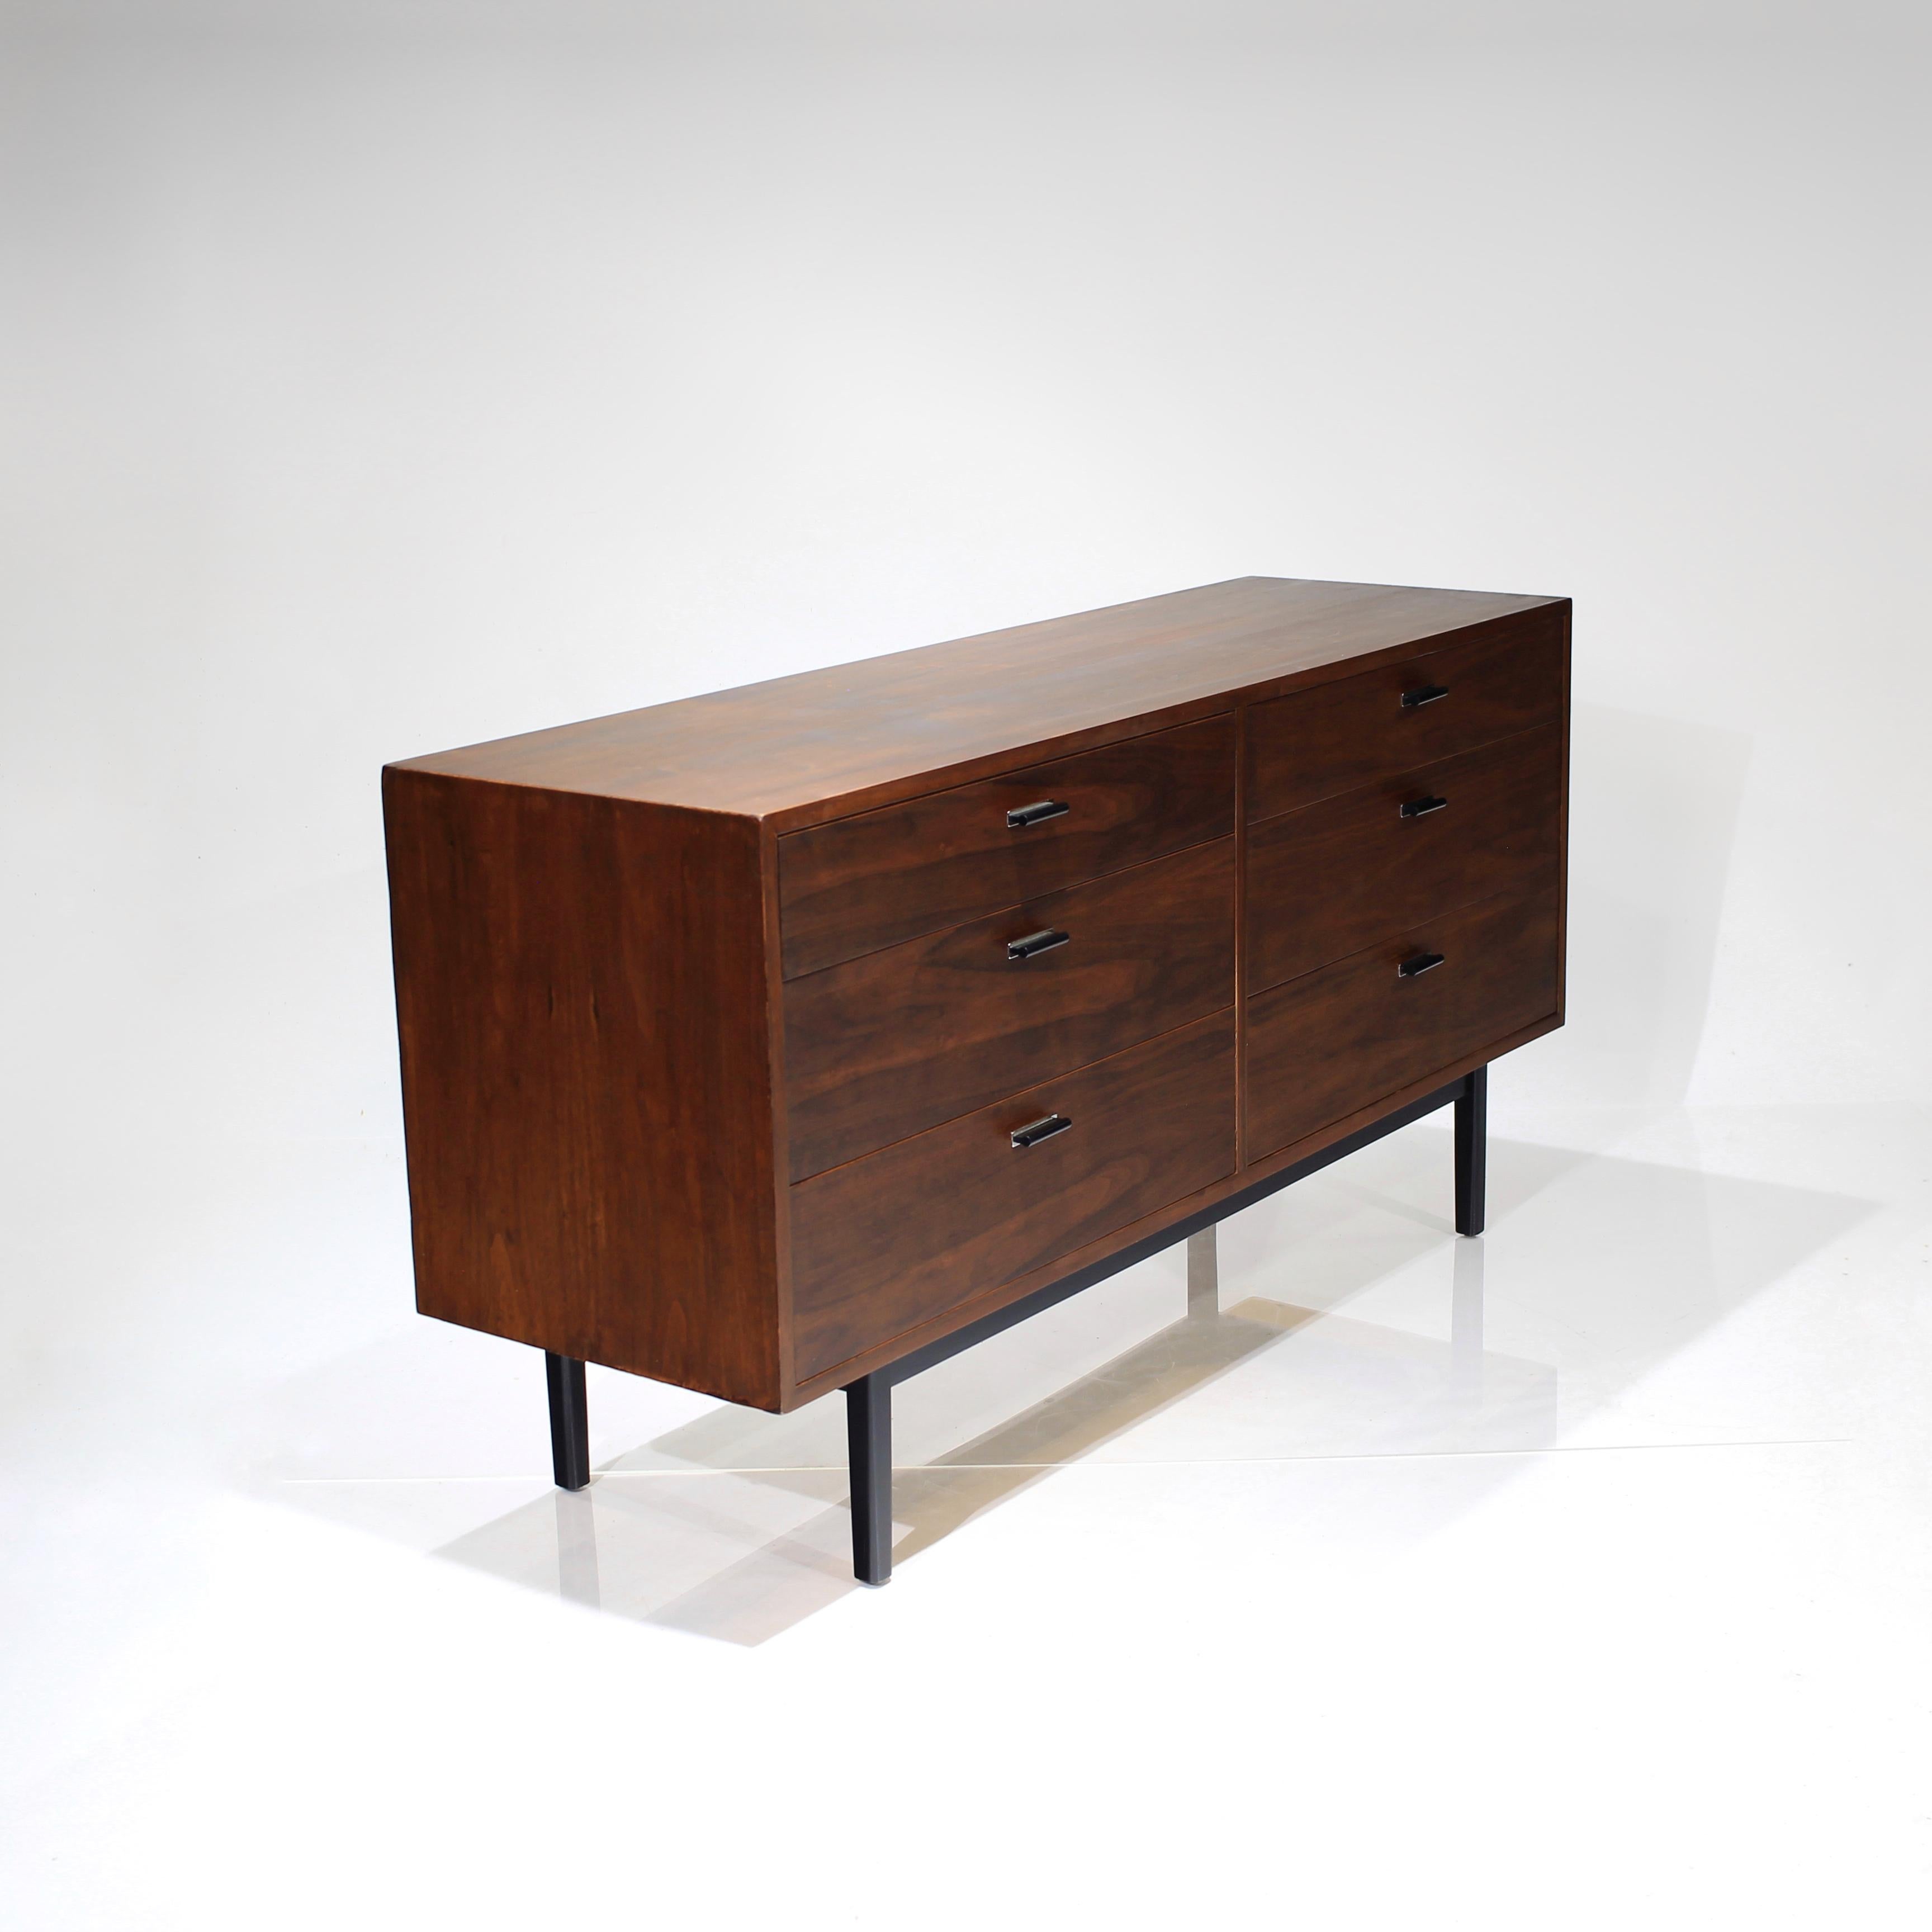 American Mid-Century Modern Walnut Dresser with 6 Drawers by Jack Cartwright